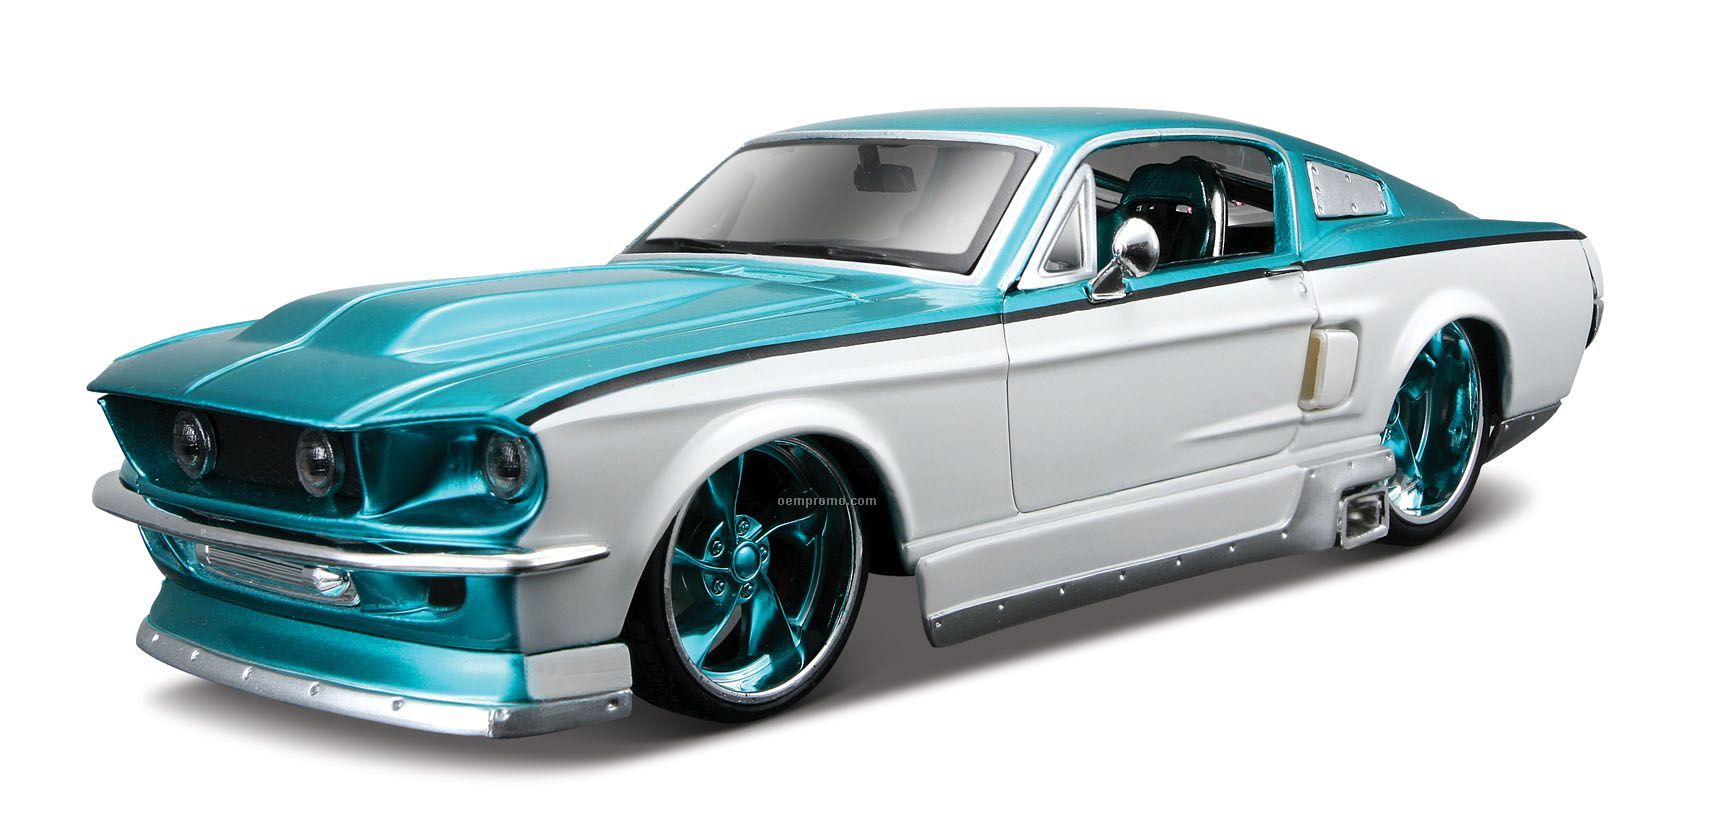 7"X2-1/2"X3" 1967 Ford Mustang Gt All Star Series Die Cast Replica